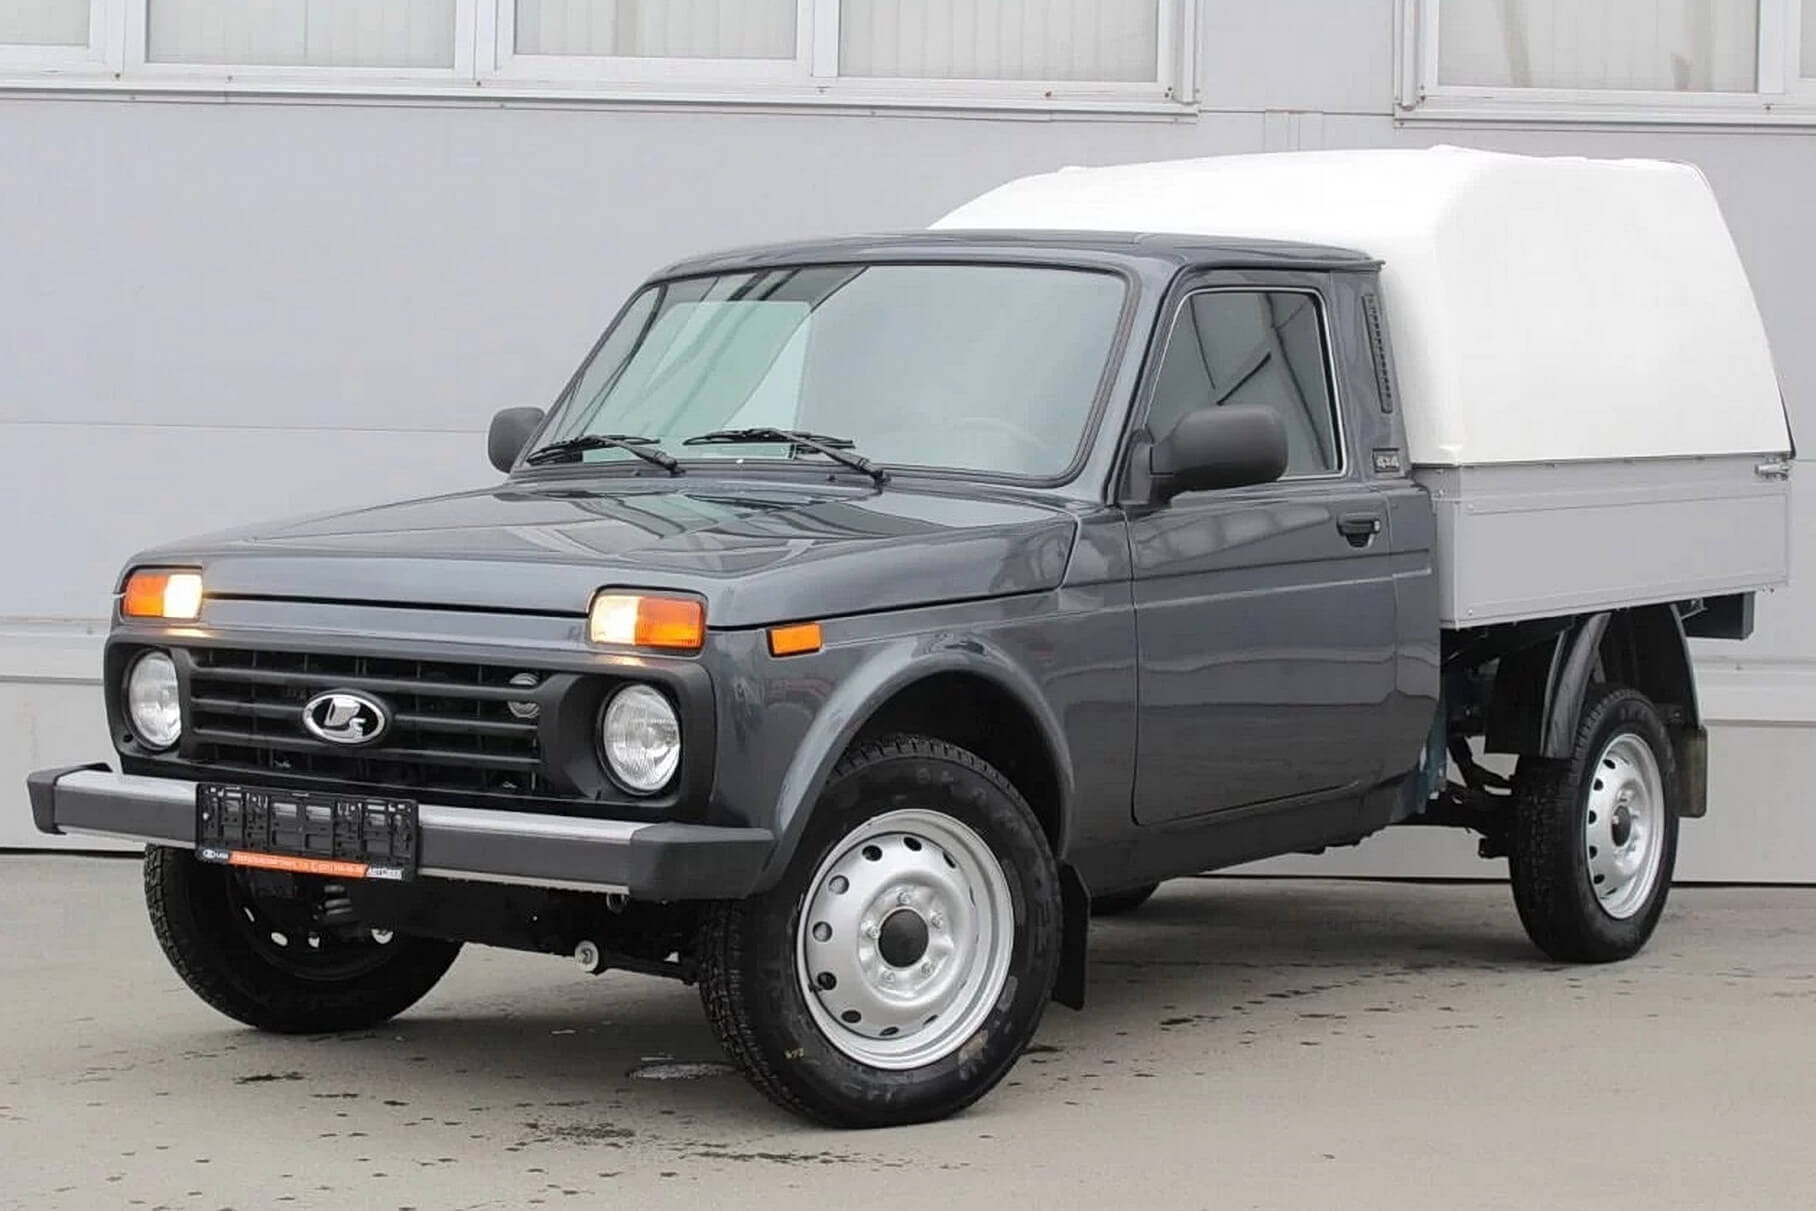 Brazil was surprised by the release of a pickup truck based on the Lada Niva Legend